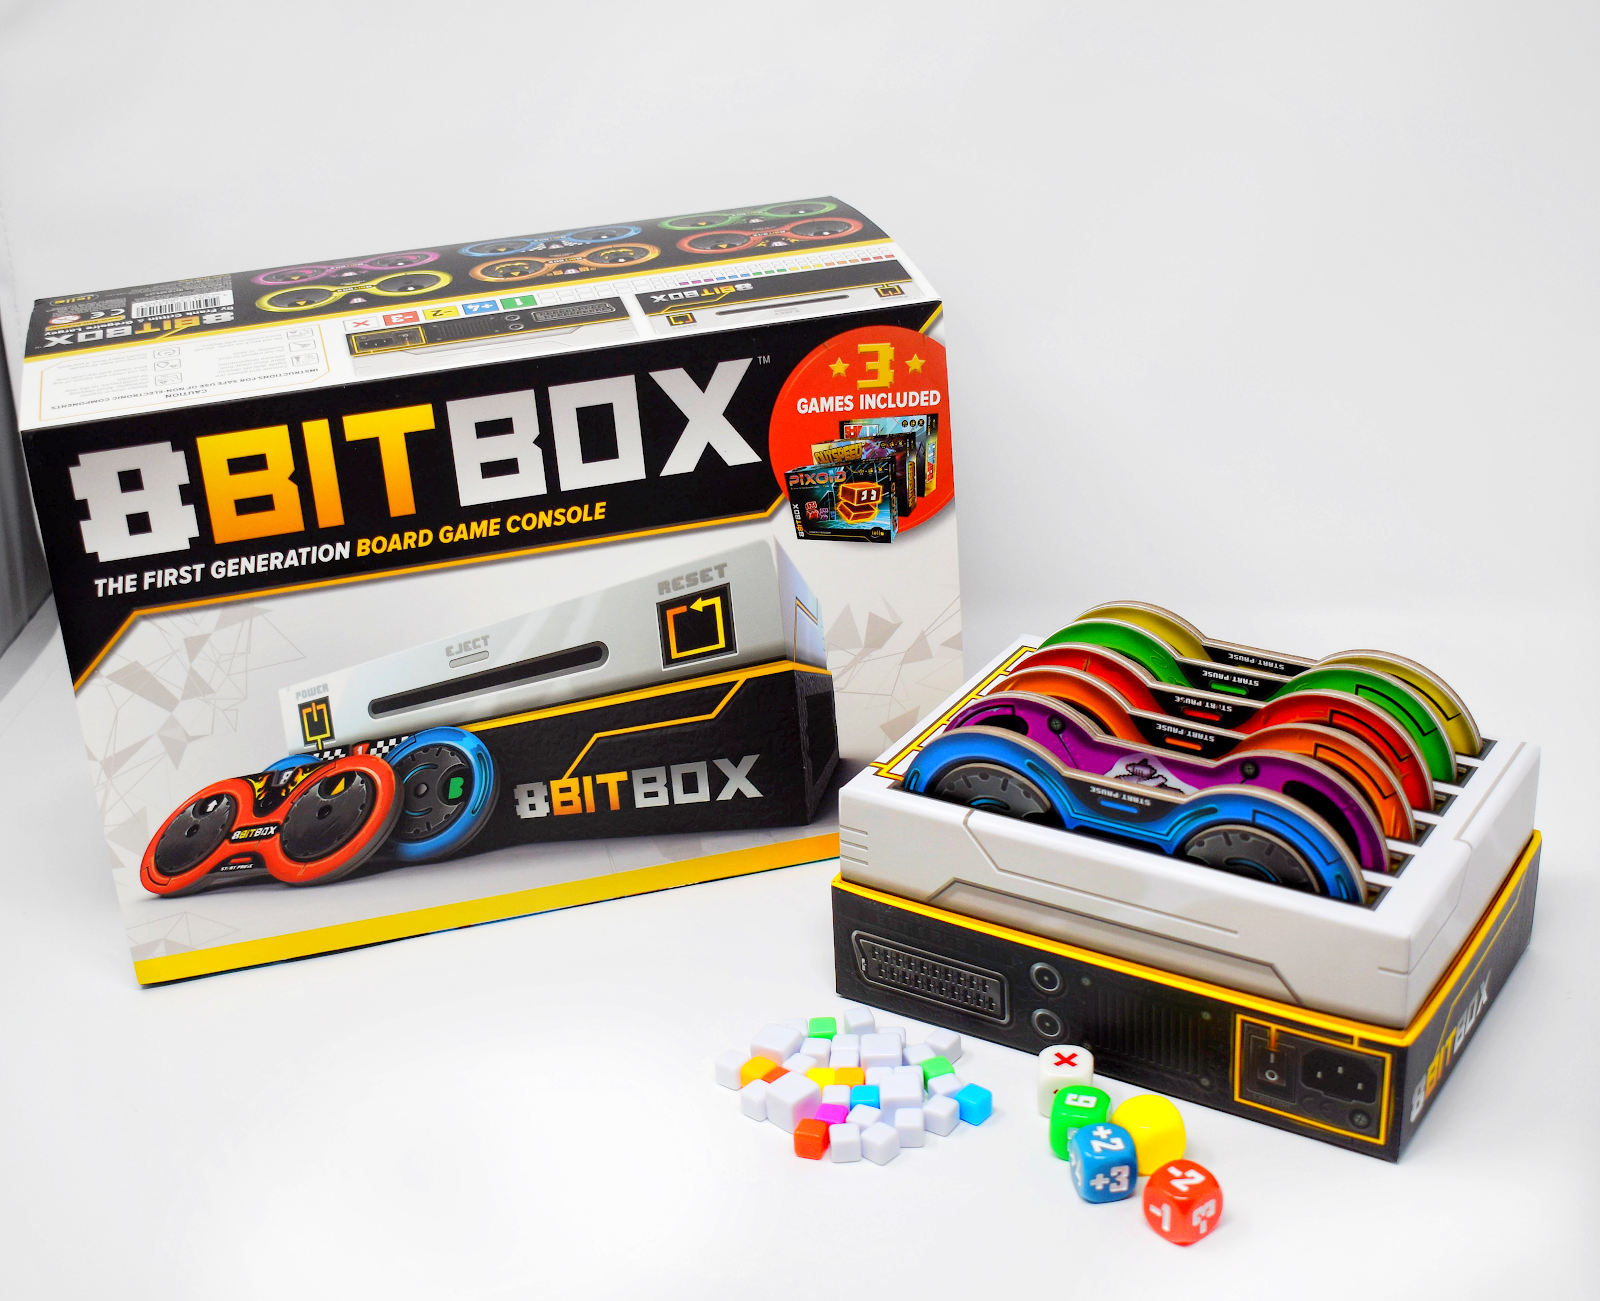 Review of 8Bit Box – The Meeple Street